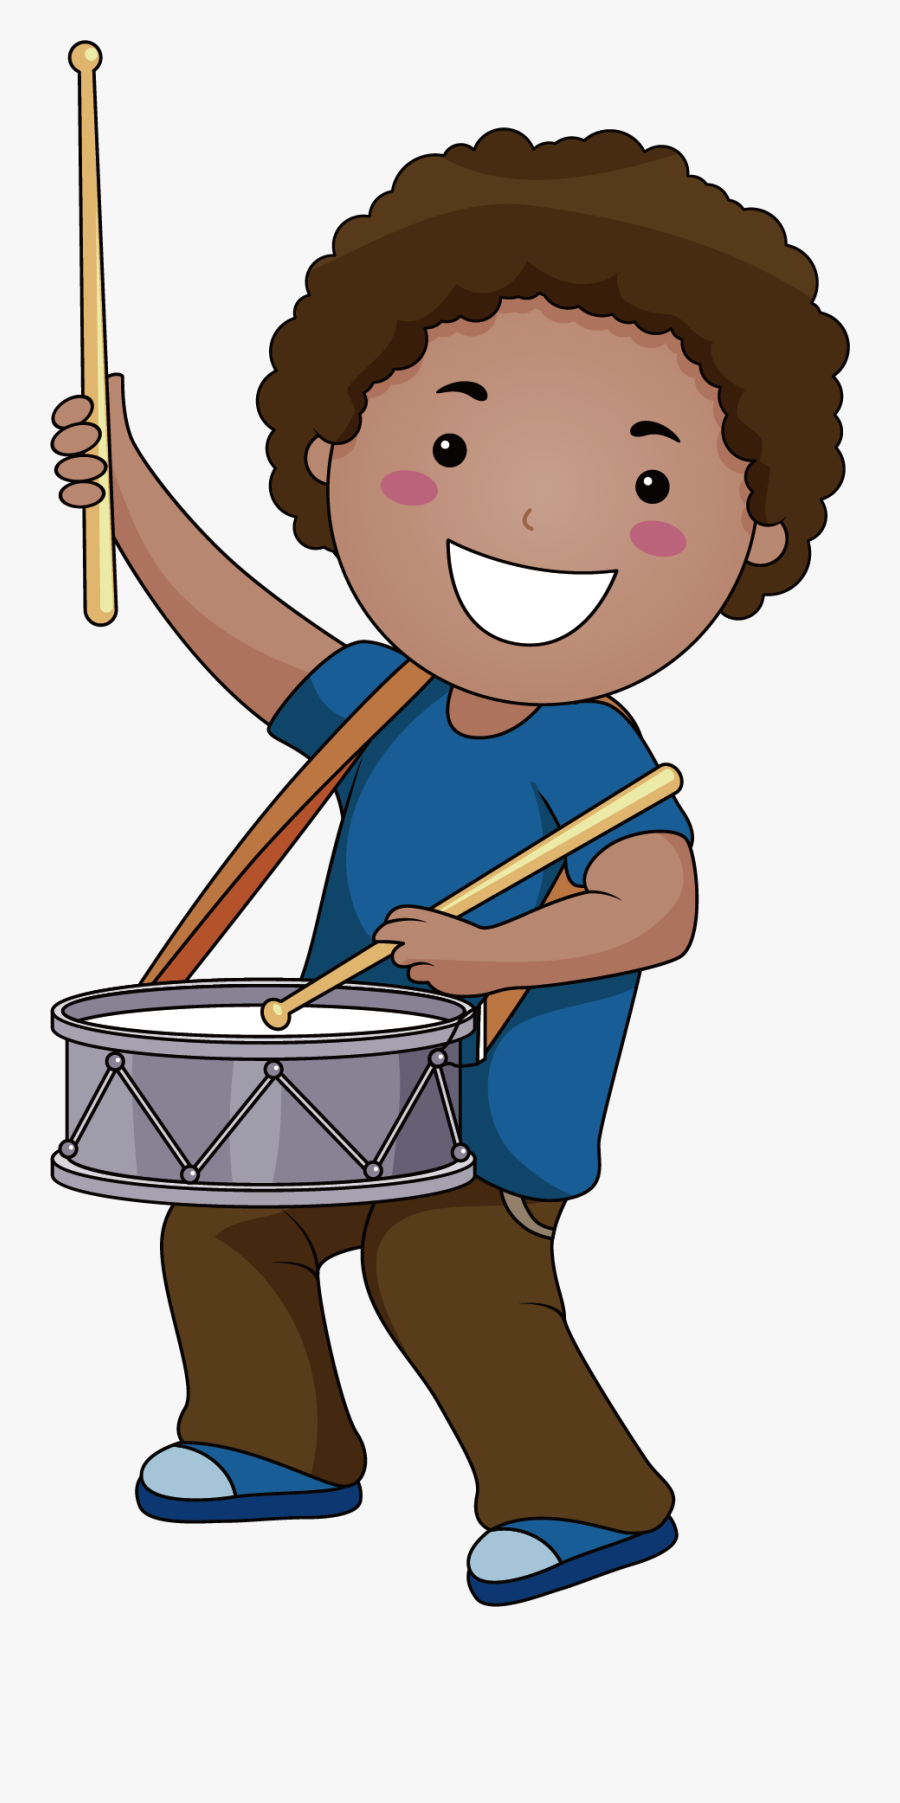 Musical Instrument Drawing Clip - Vbs Kids Clipart, Transparent Clipart